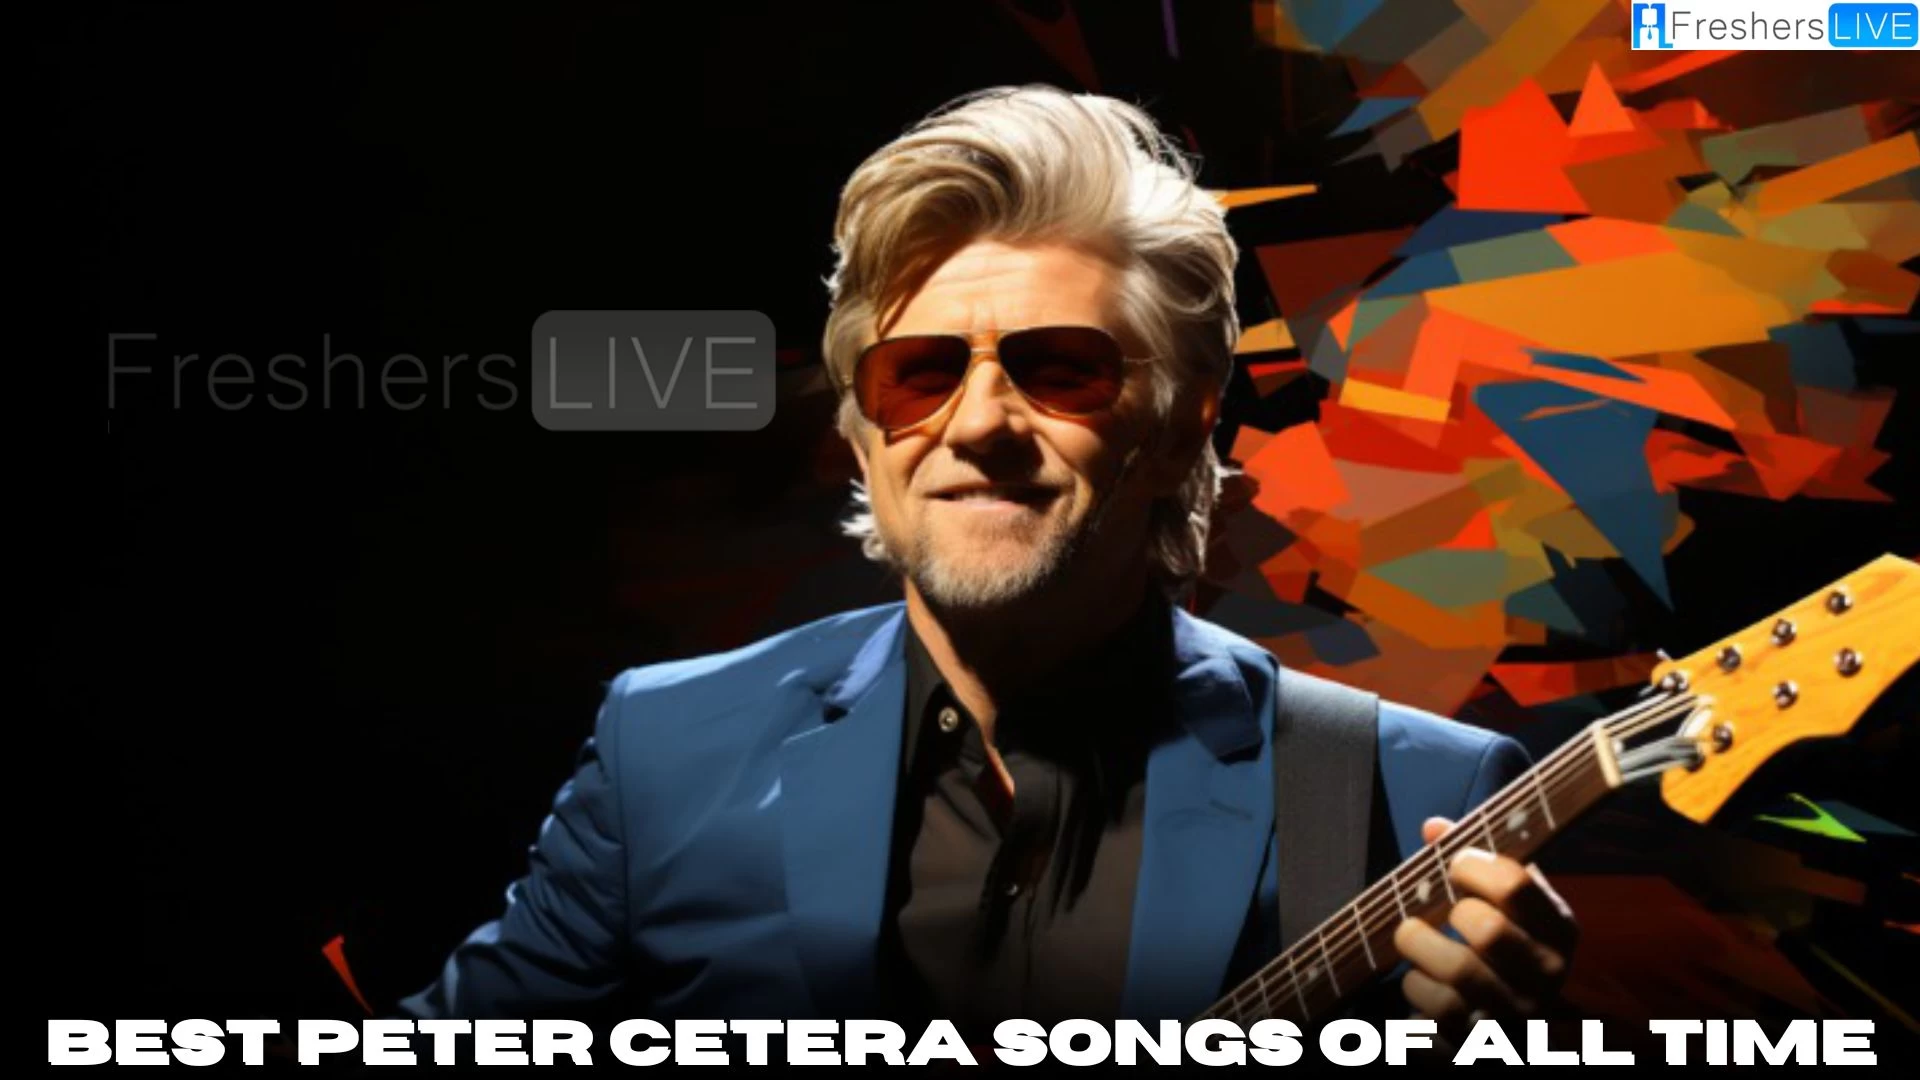 Best Peter Cetera Songs of All Time - Top 10 Melodic Mastery